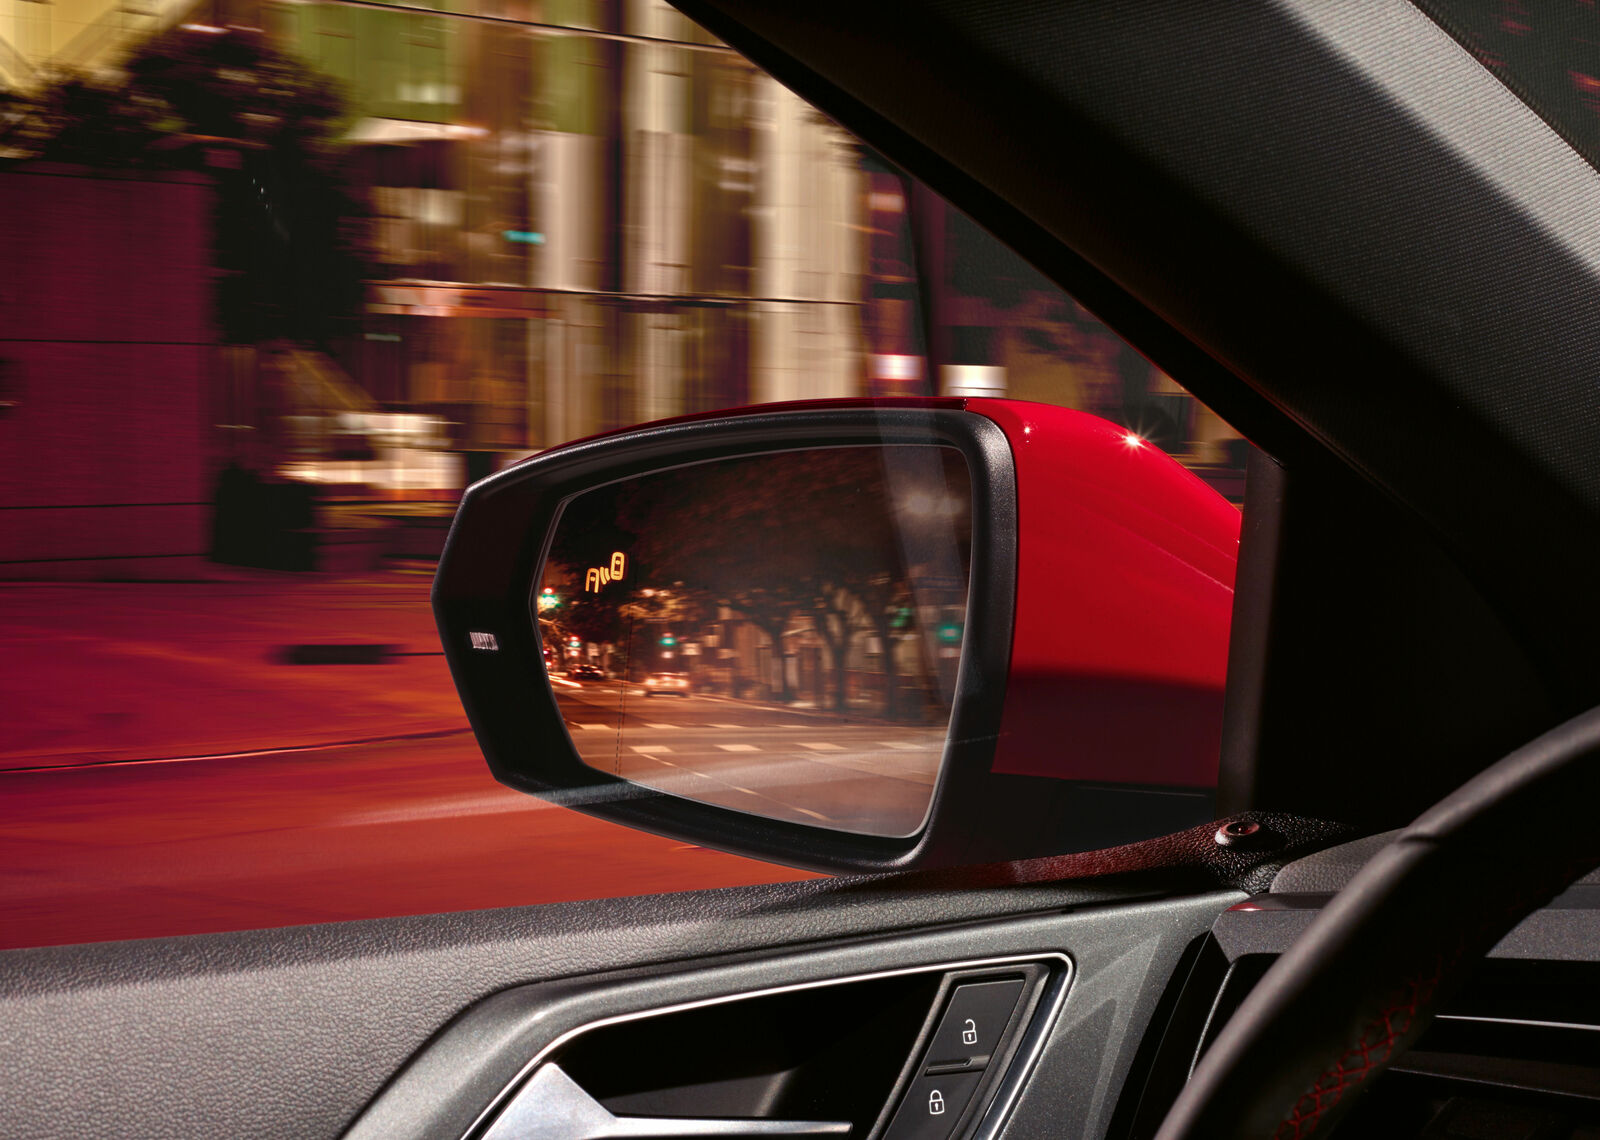 Blind Spot Monitor with Rear Traffic Alert